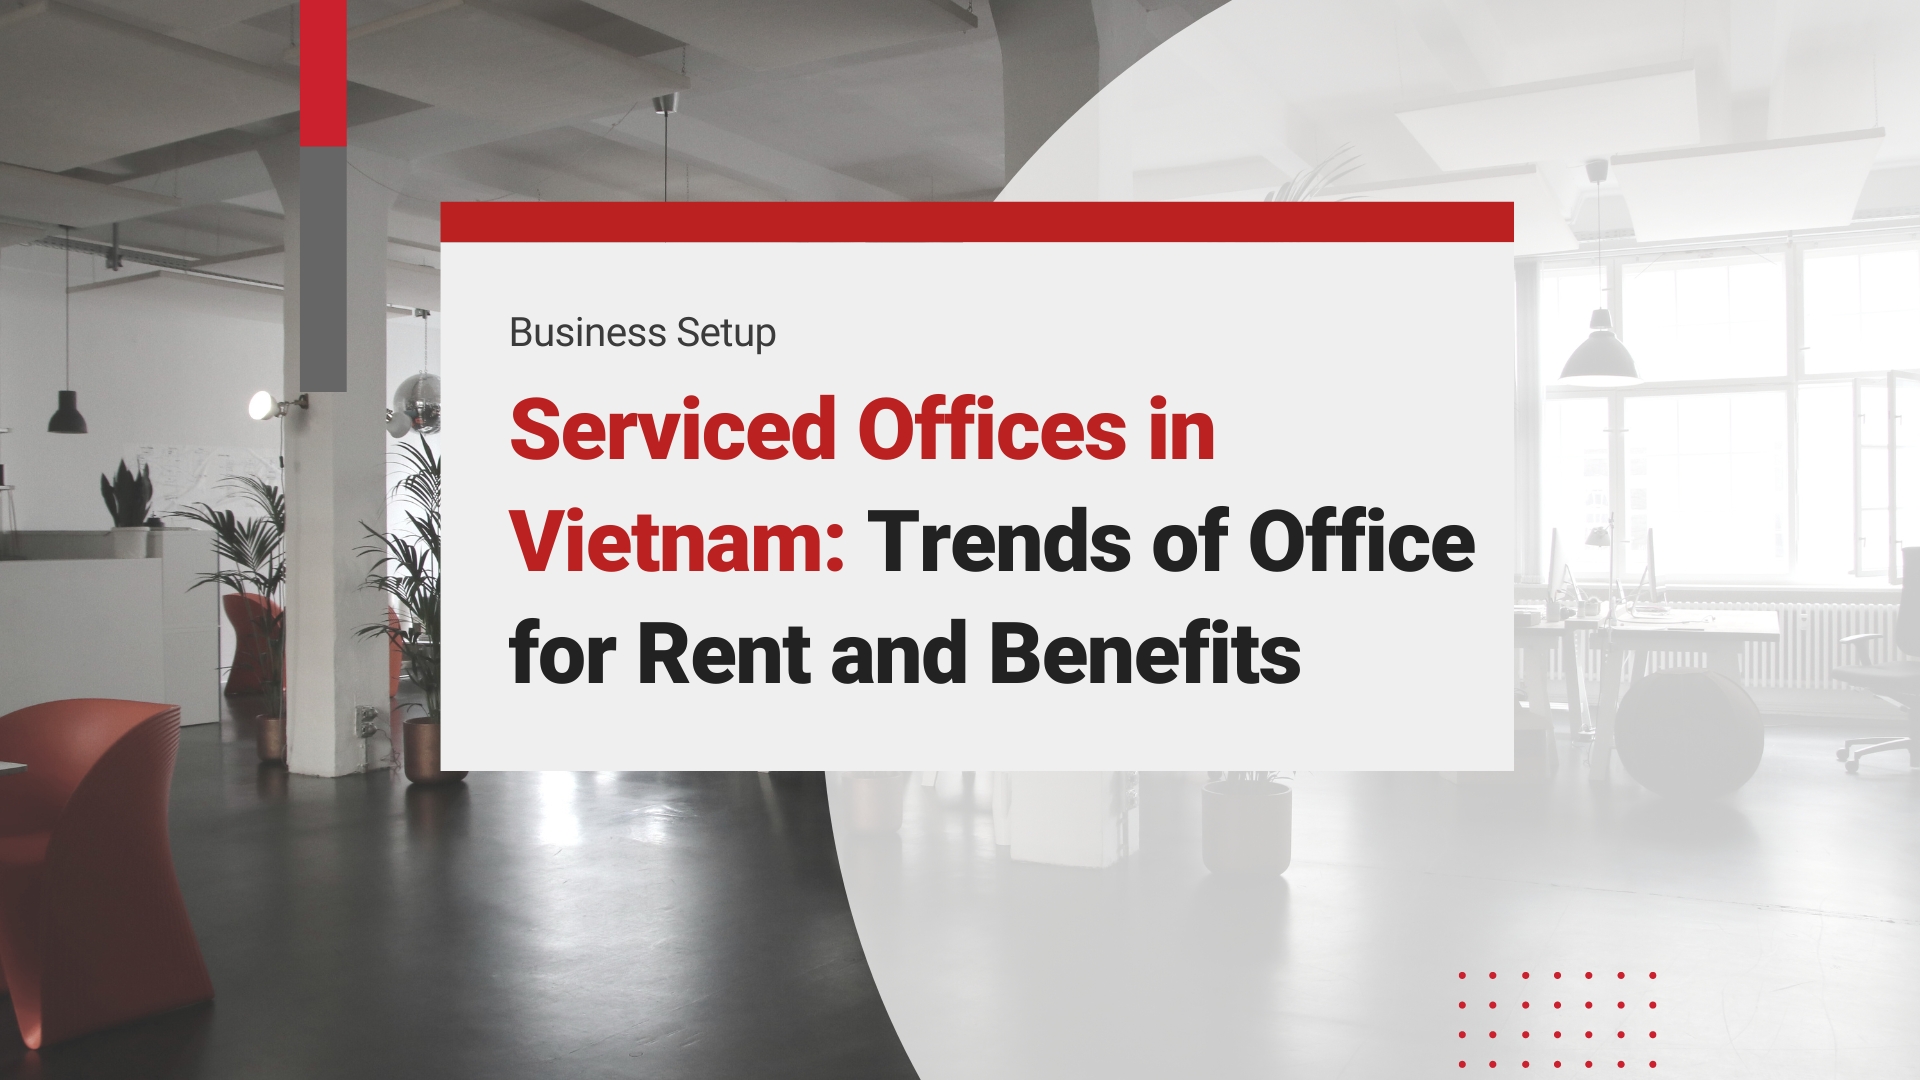 Serviced Offices in Vietnam: Trends of Office for Rent and Benefits